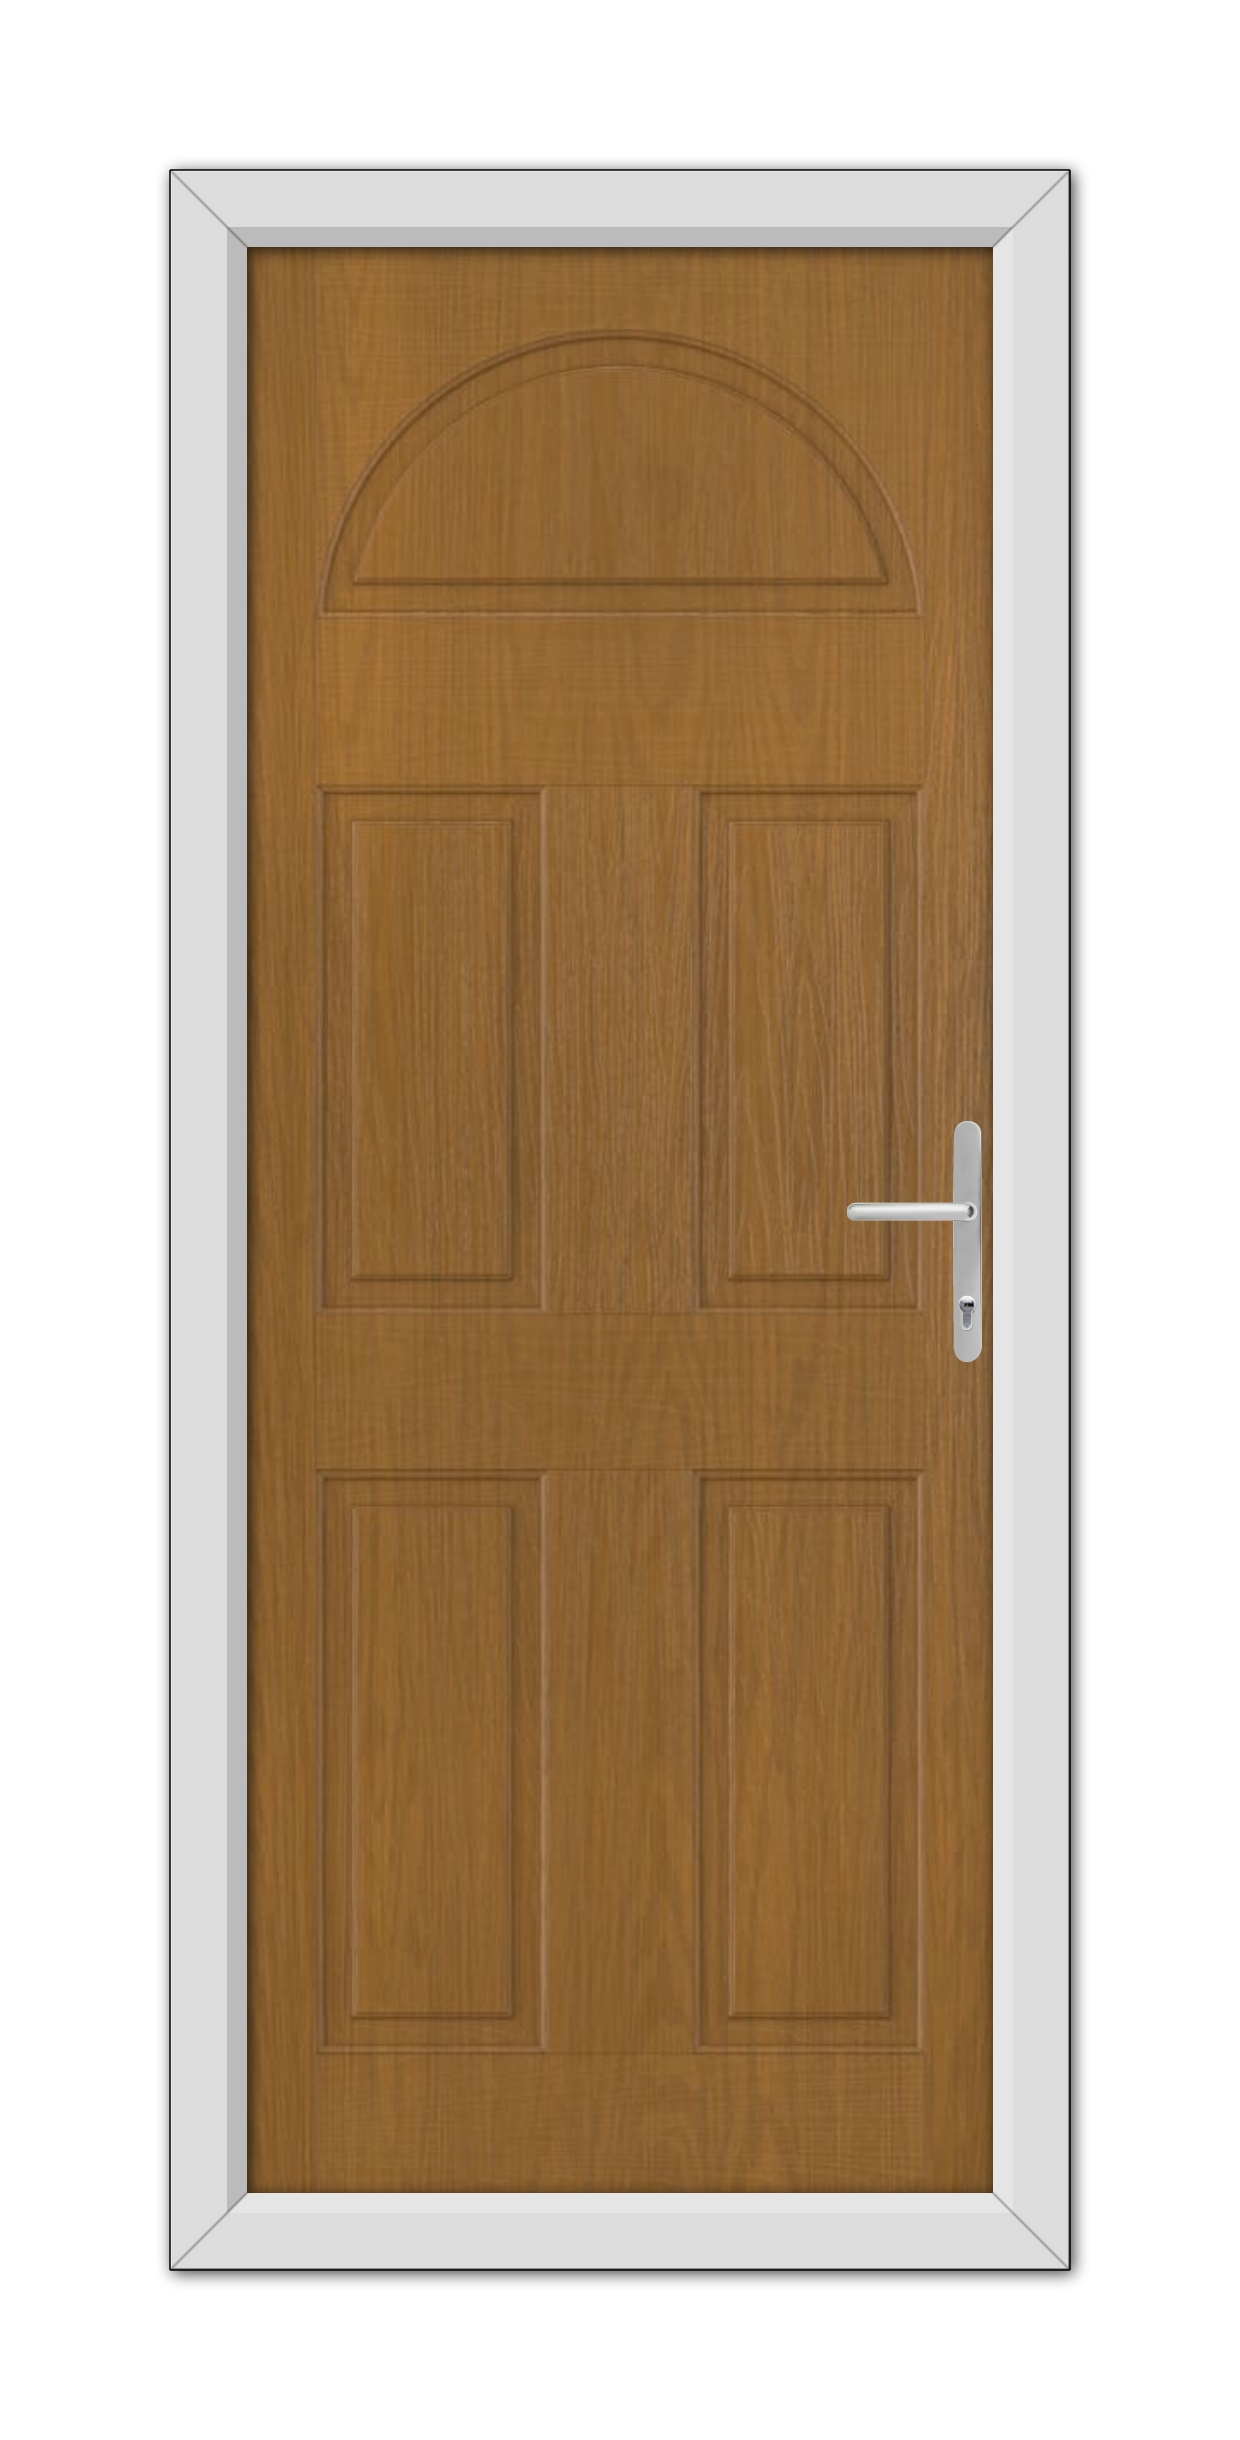 A Oak Winslow Solid Composite Door 48mm Timber Core with a semi-circular panel at the top and a metal handle, set within a white frame.